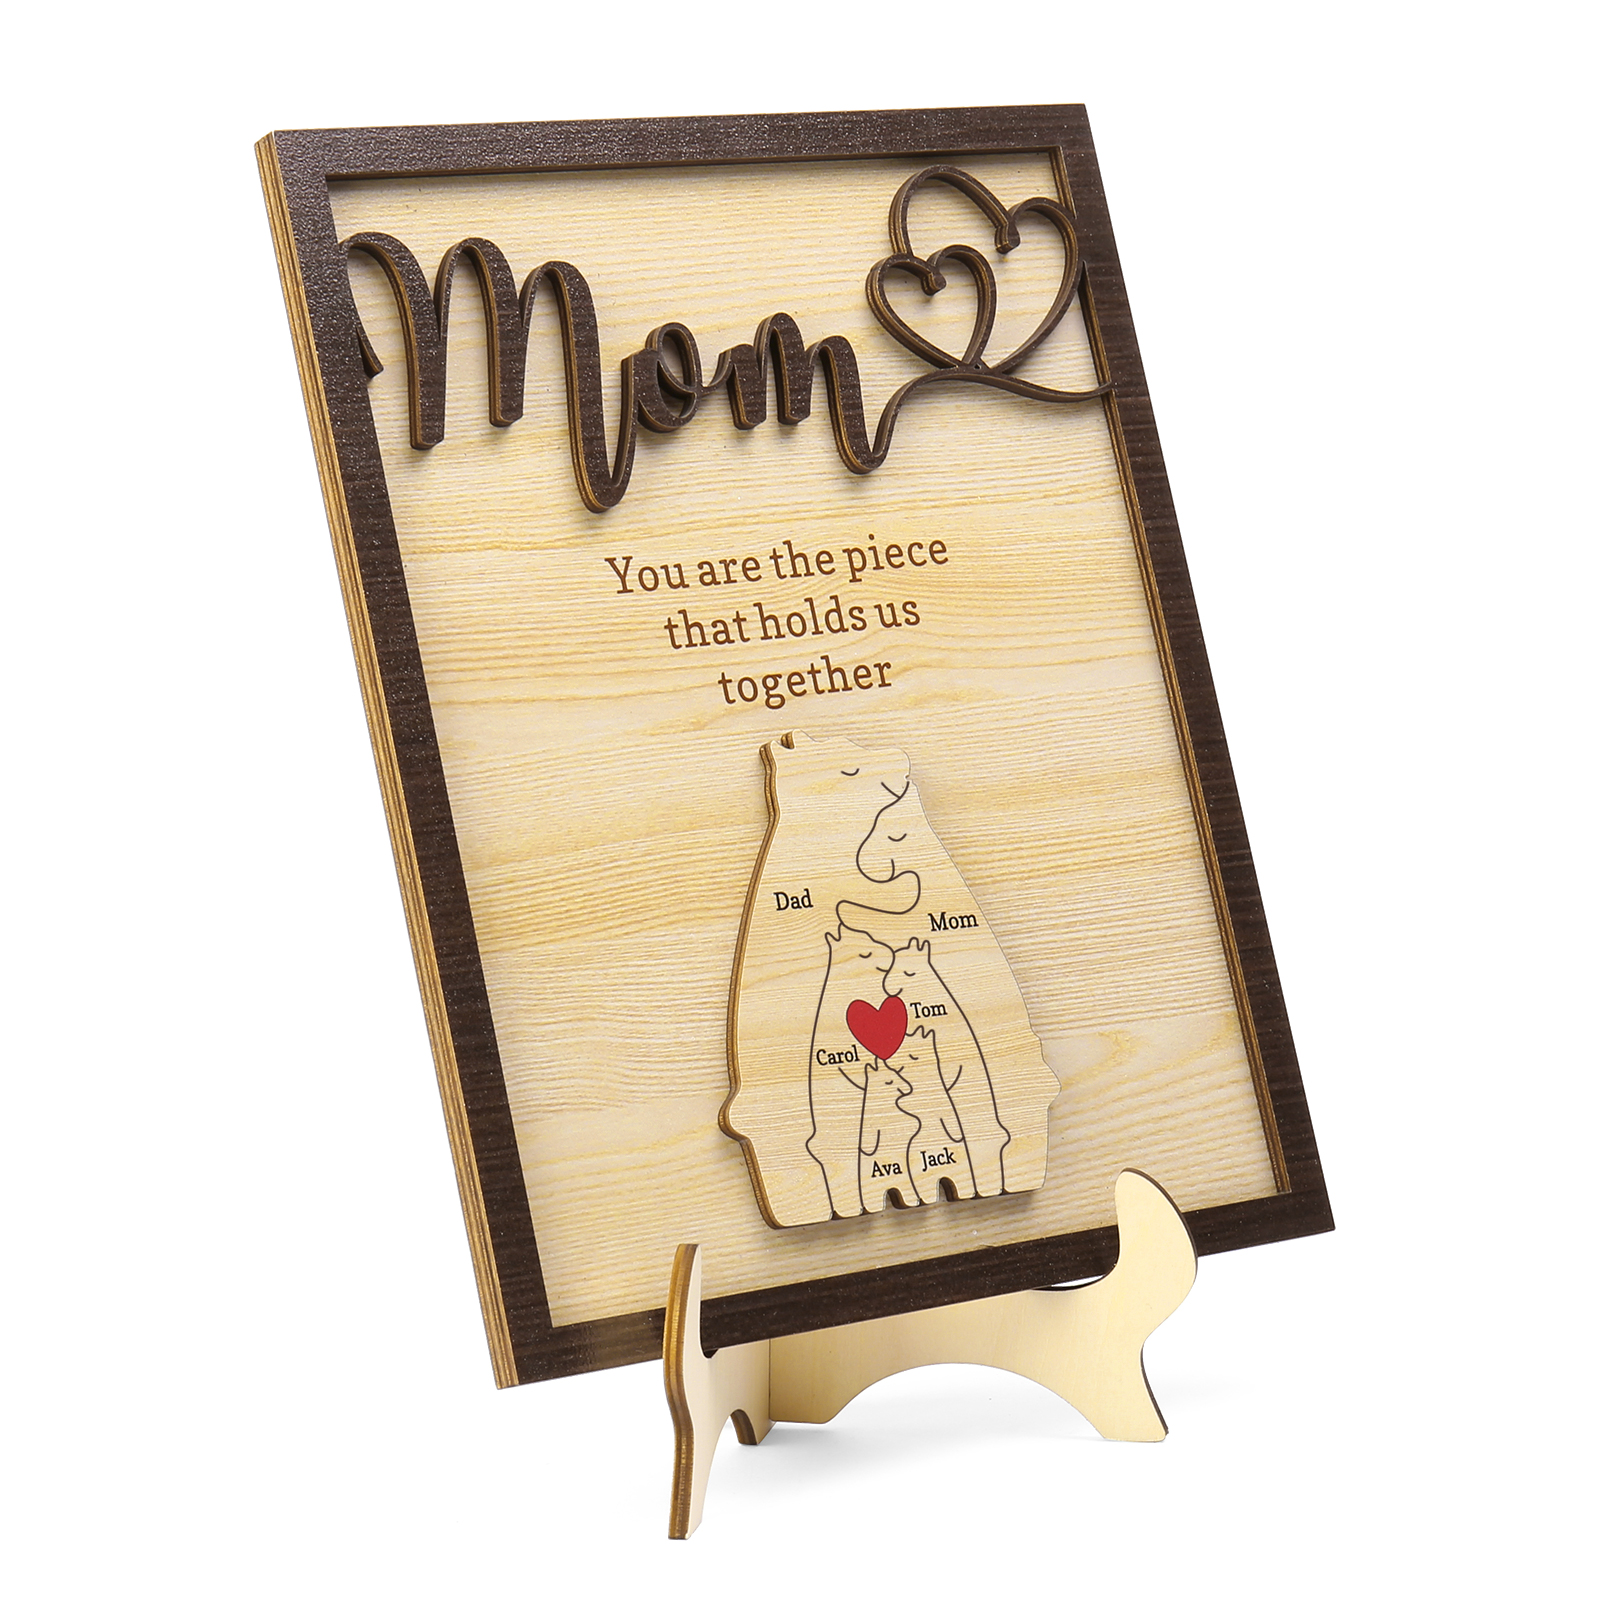 6 Names - Personalized Home Frame Wooden Ornaments Cute Bear Style Ornaments for Mom